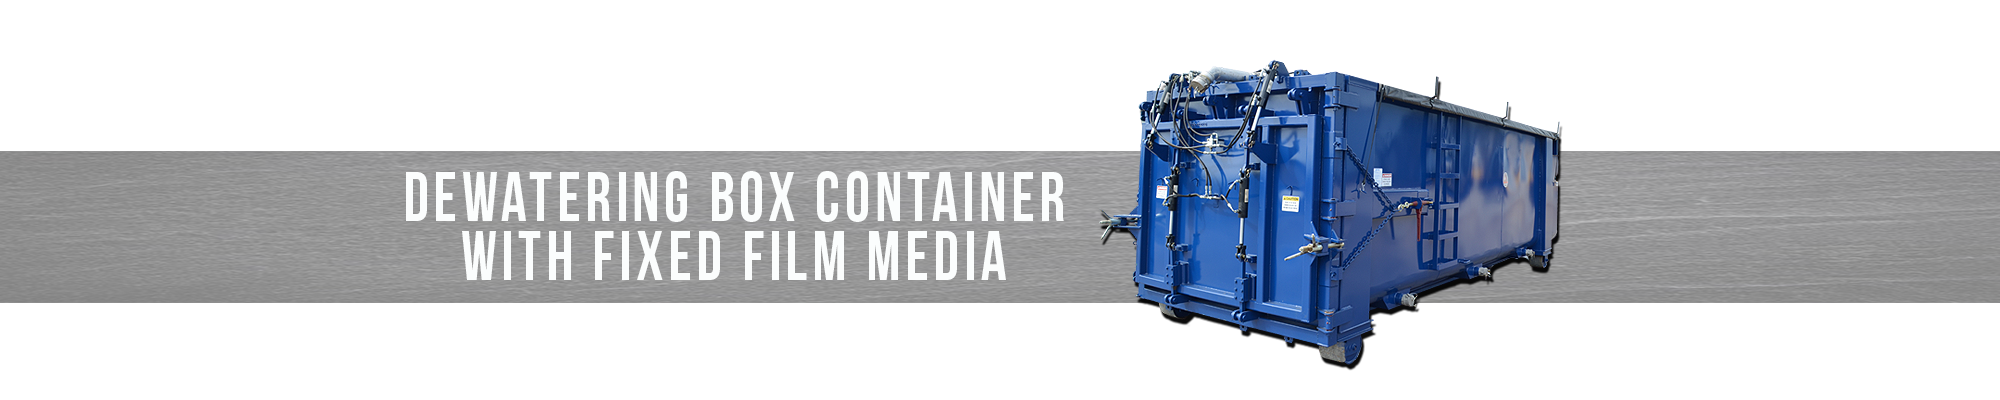 Dewatering Box Container with Fixed Film Media